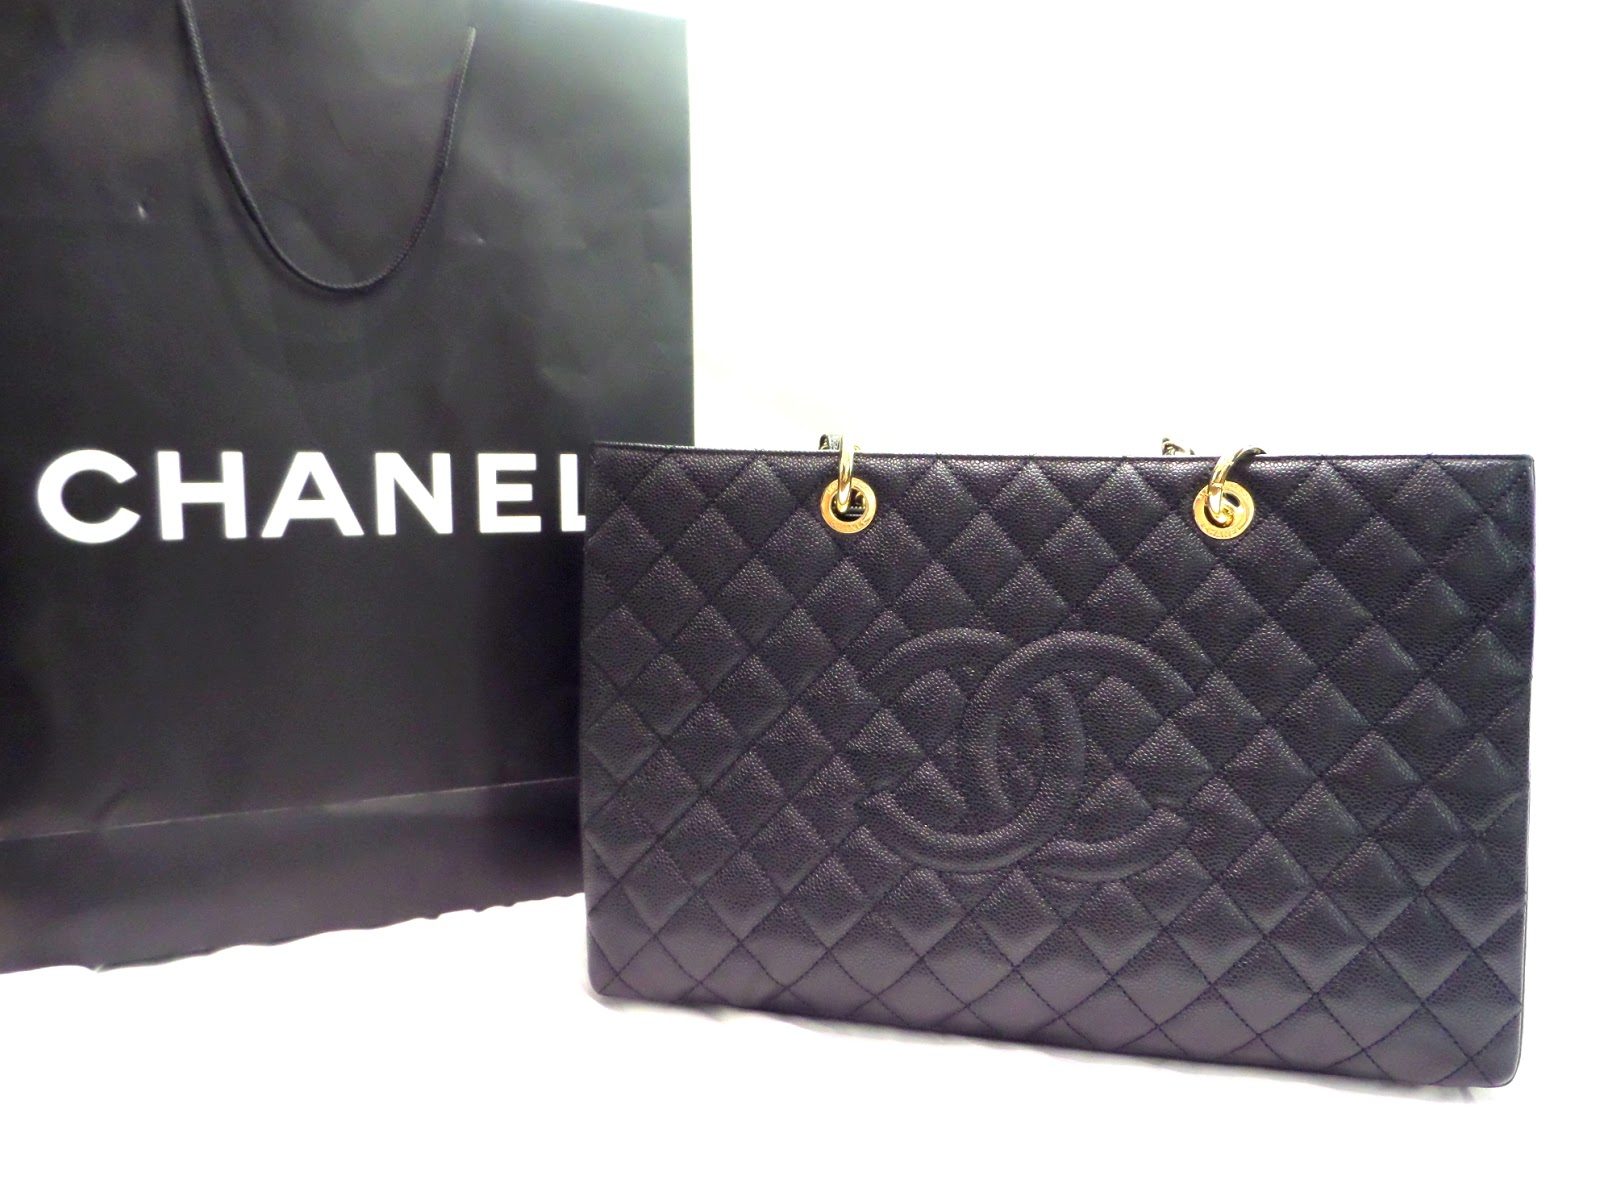 Vancouver Luxury Designer Consignment Shop: Buy Sell Consign Chanel Handbags ~ Vancouver Upscale ...